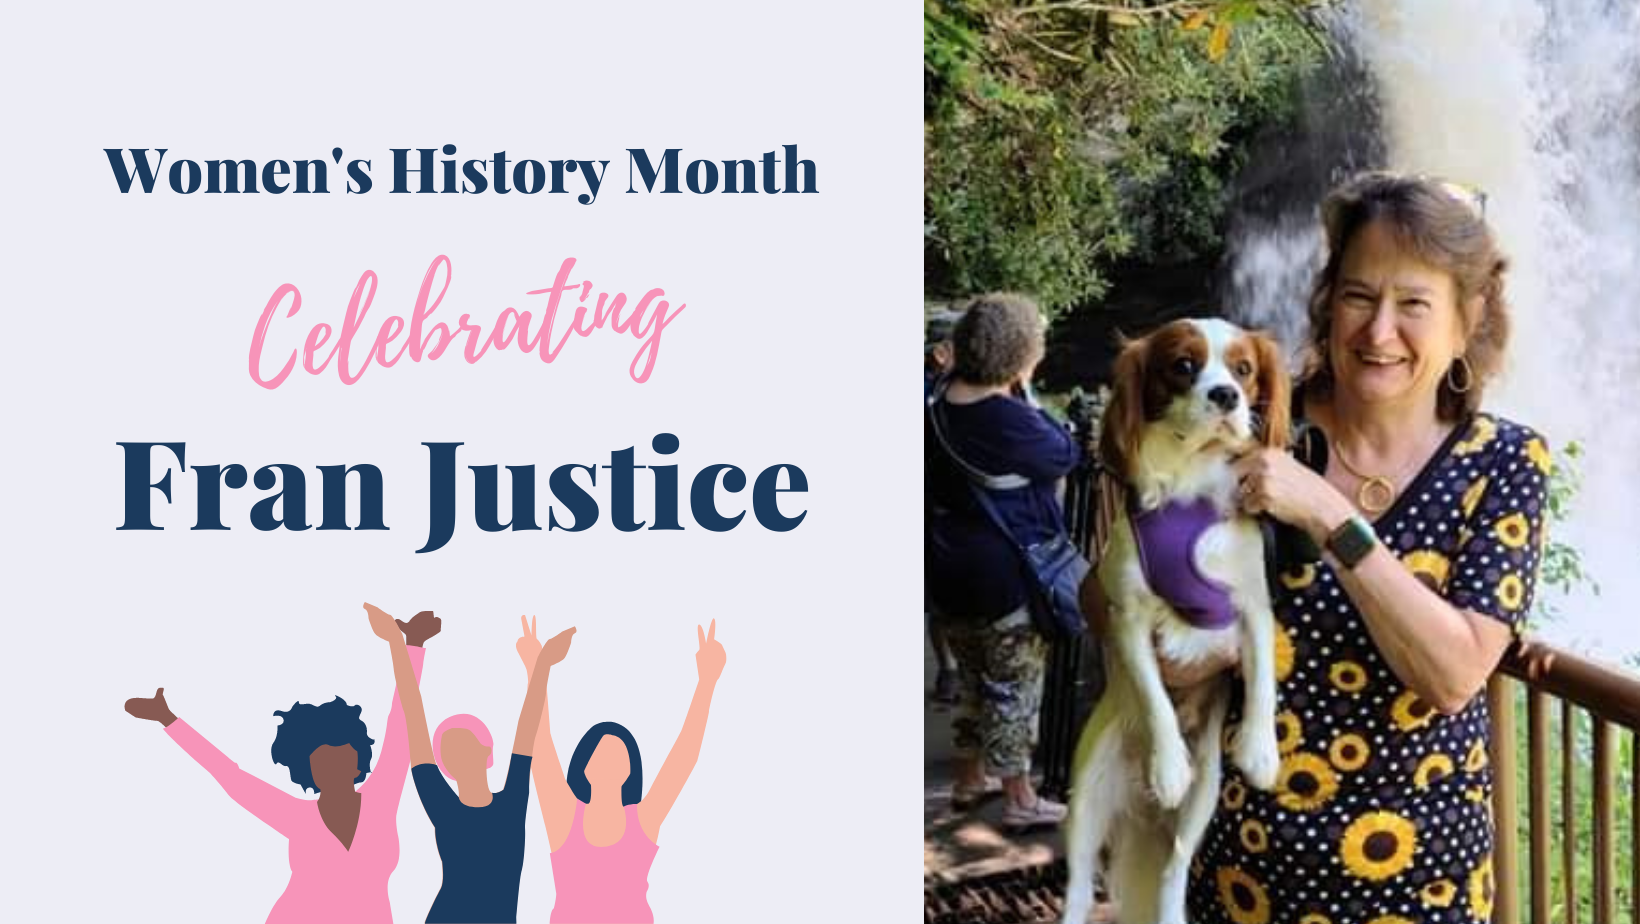 Women's History Month - Celebrating Fran Justice!